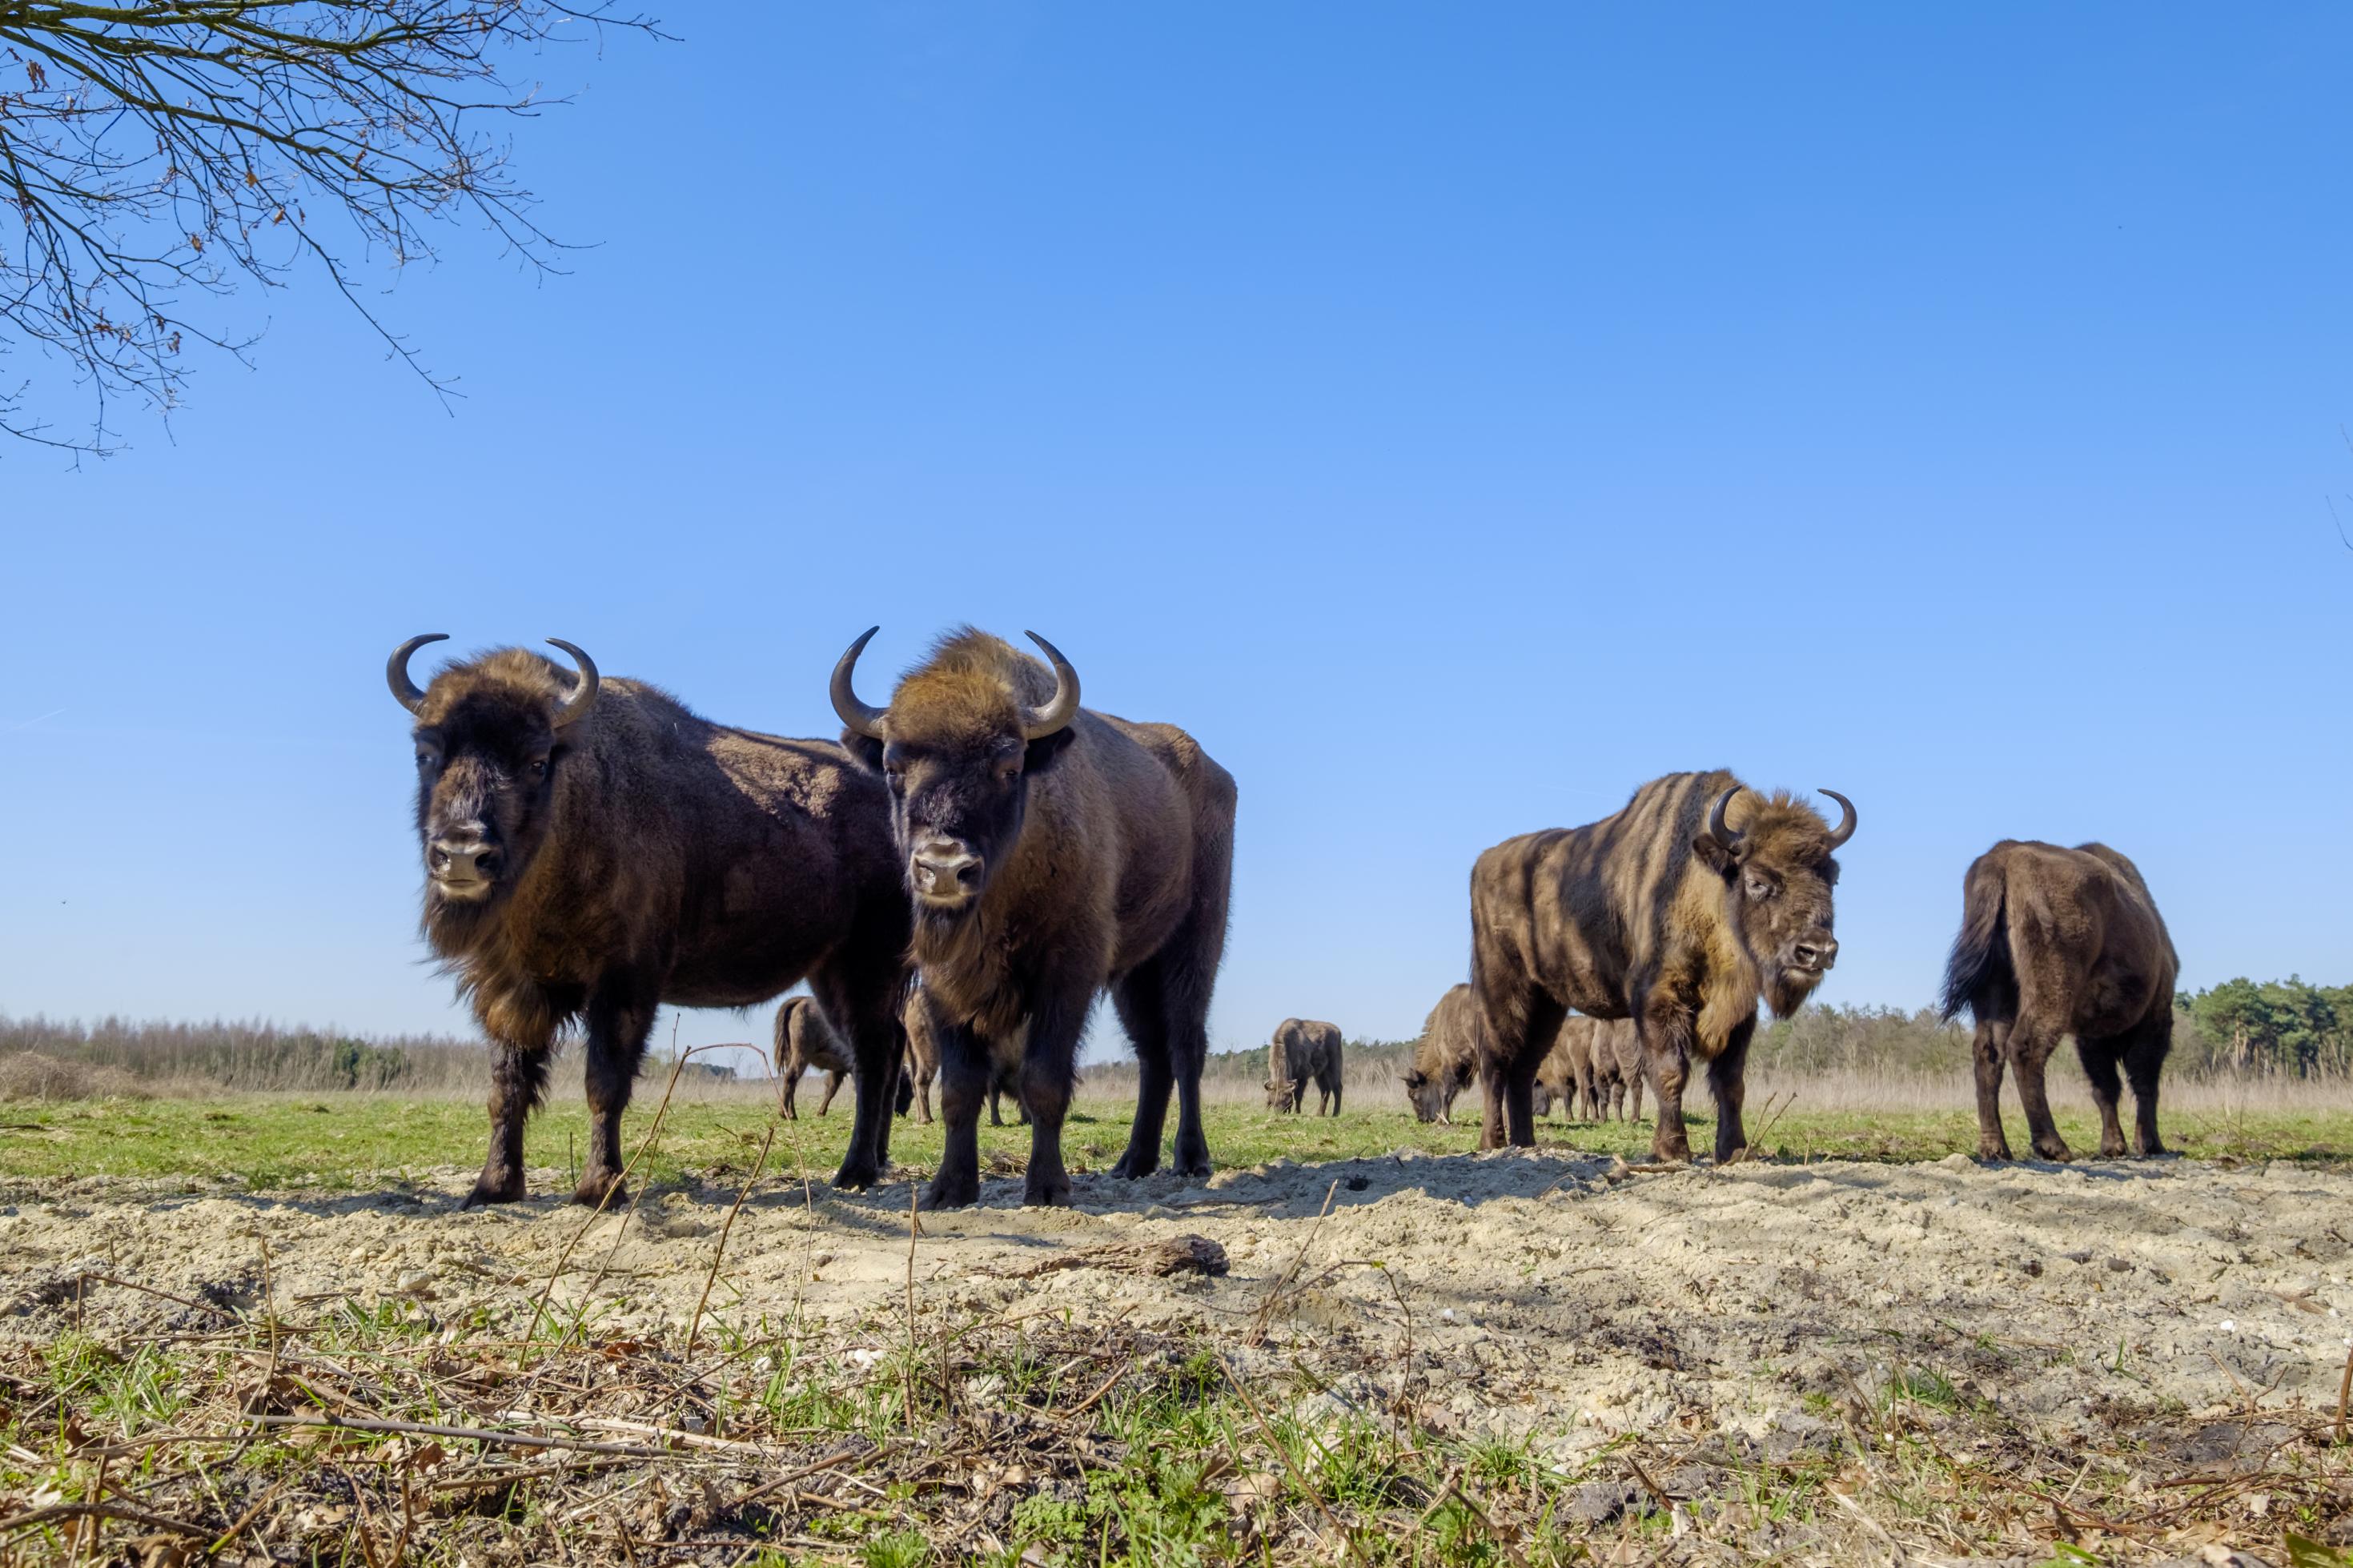 a wisent The European bison stands in the natural park of the Maashorst, Netherlands